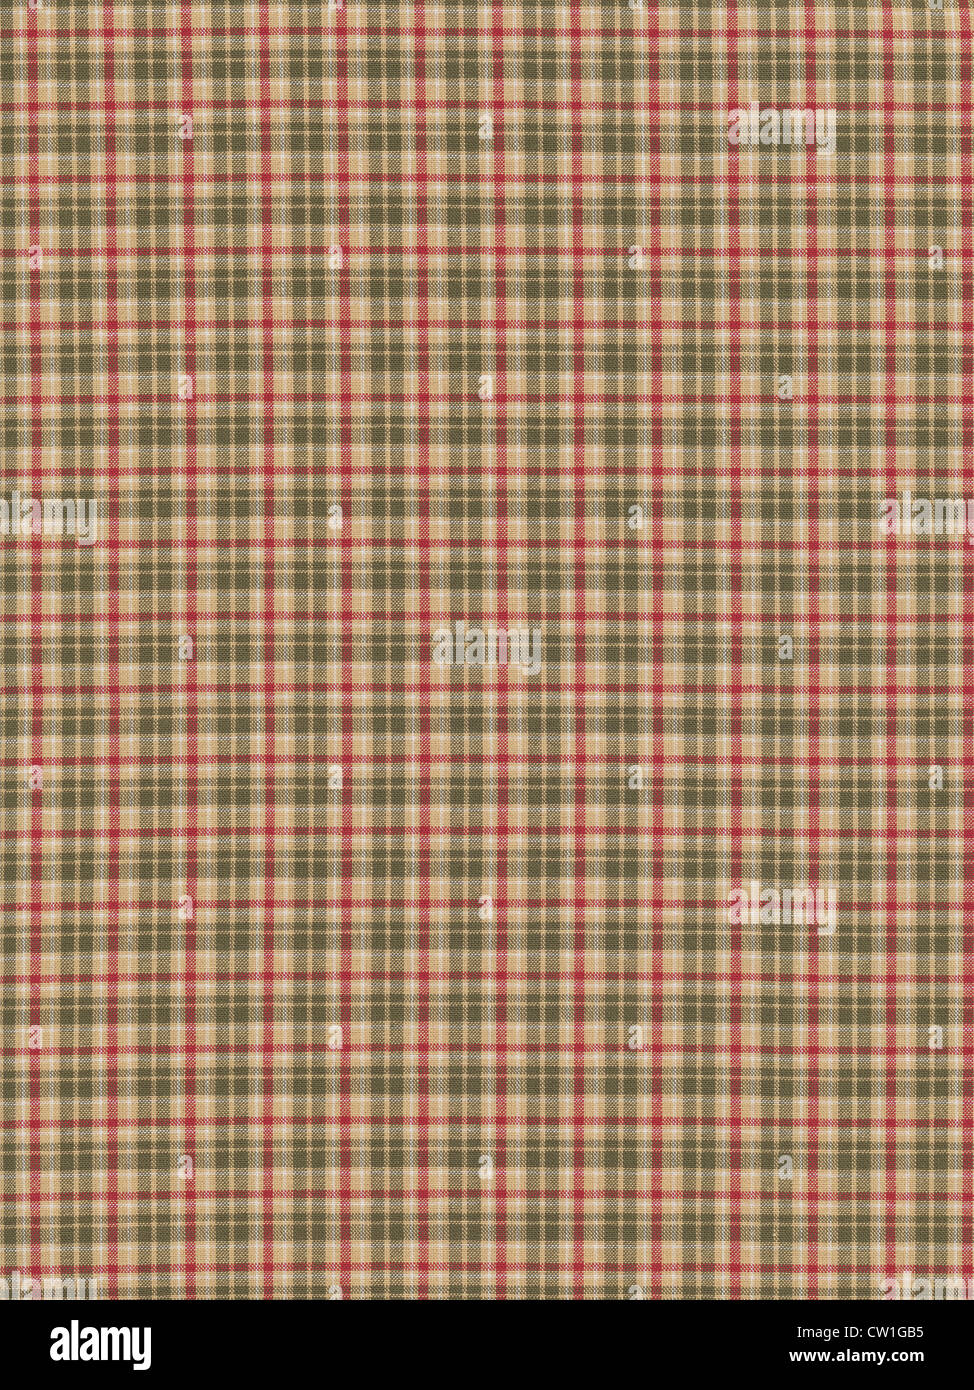 Red white green and tan plaid gingham textile background. Stock Photo